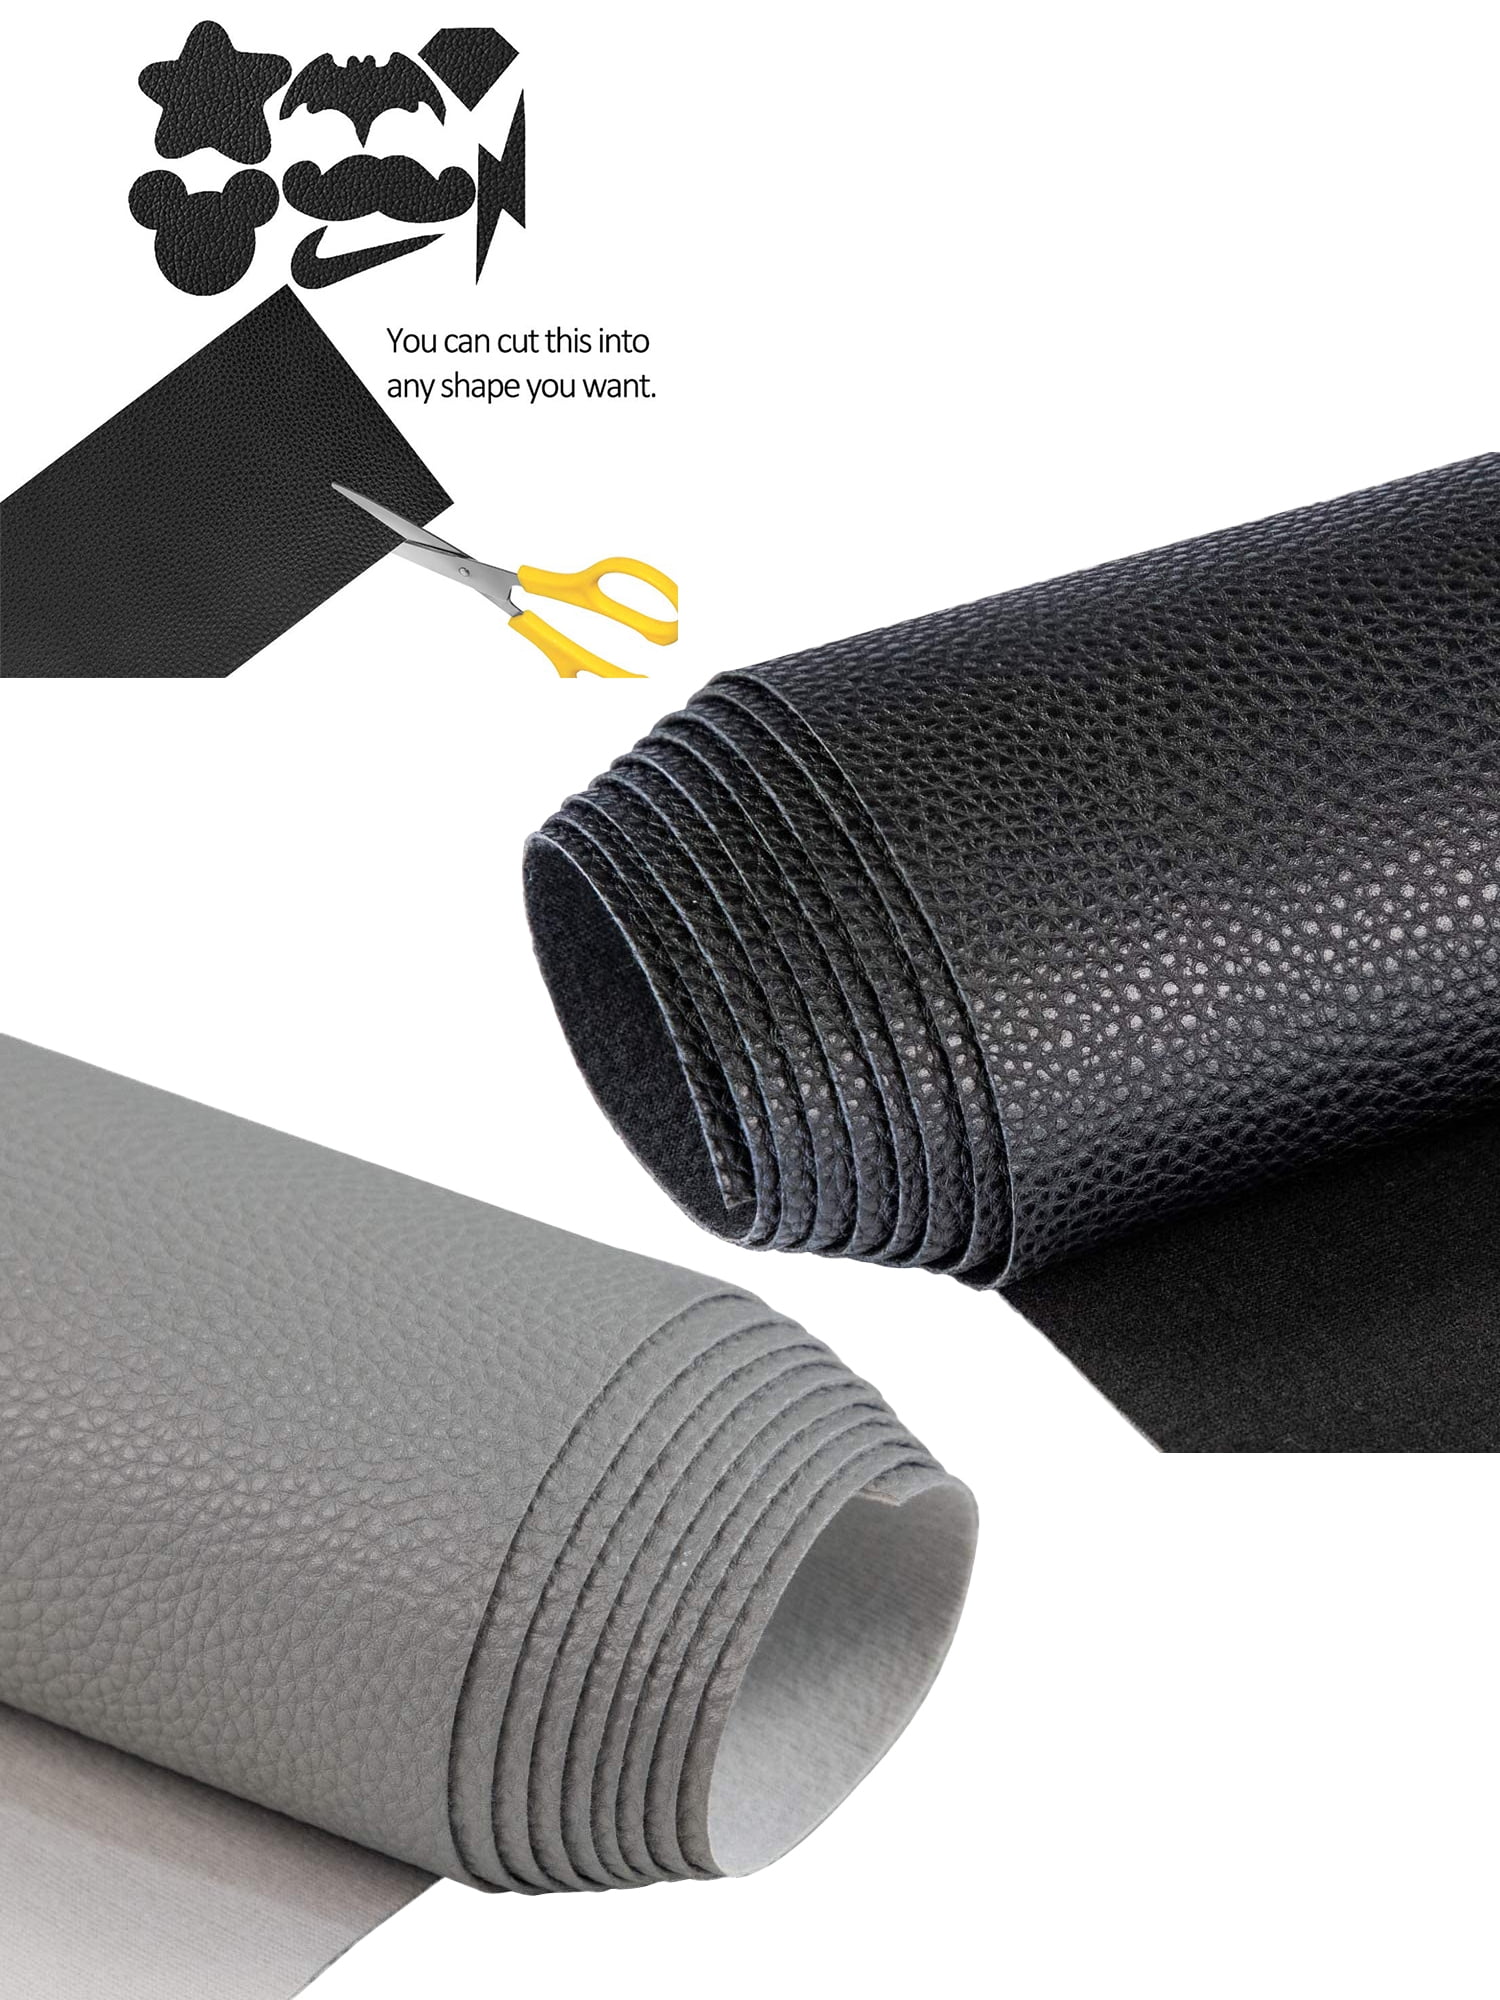 Leather and Vinyl Repair Tape 3x60 inch, Strong Adhesion Backing Self  Adhesive Vinyl and Leather Repair Kit for Car Seat, Couch, Furniture,  Jacket.